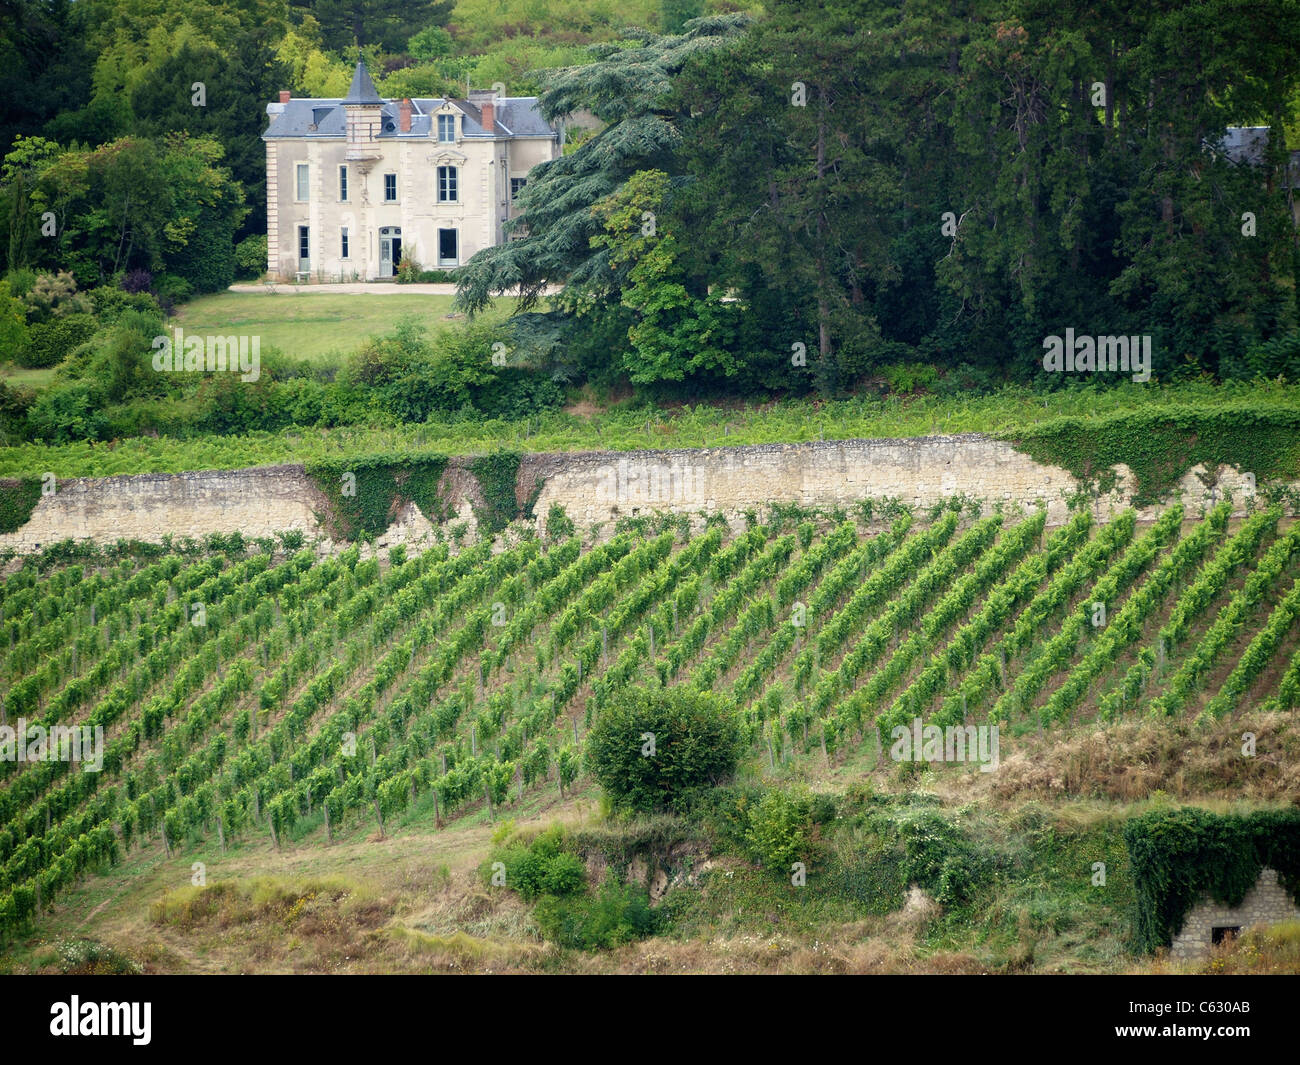 Mansion with vineyard, Chinon, France Stock Photo